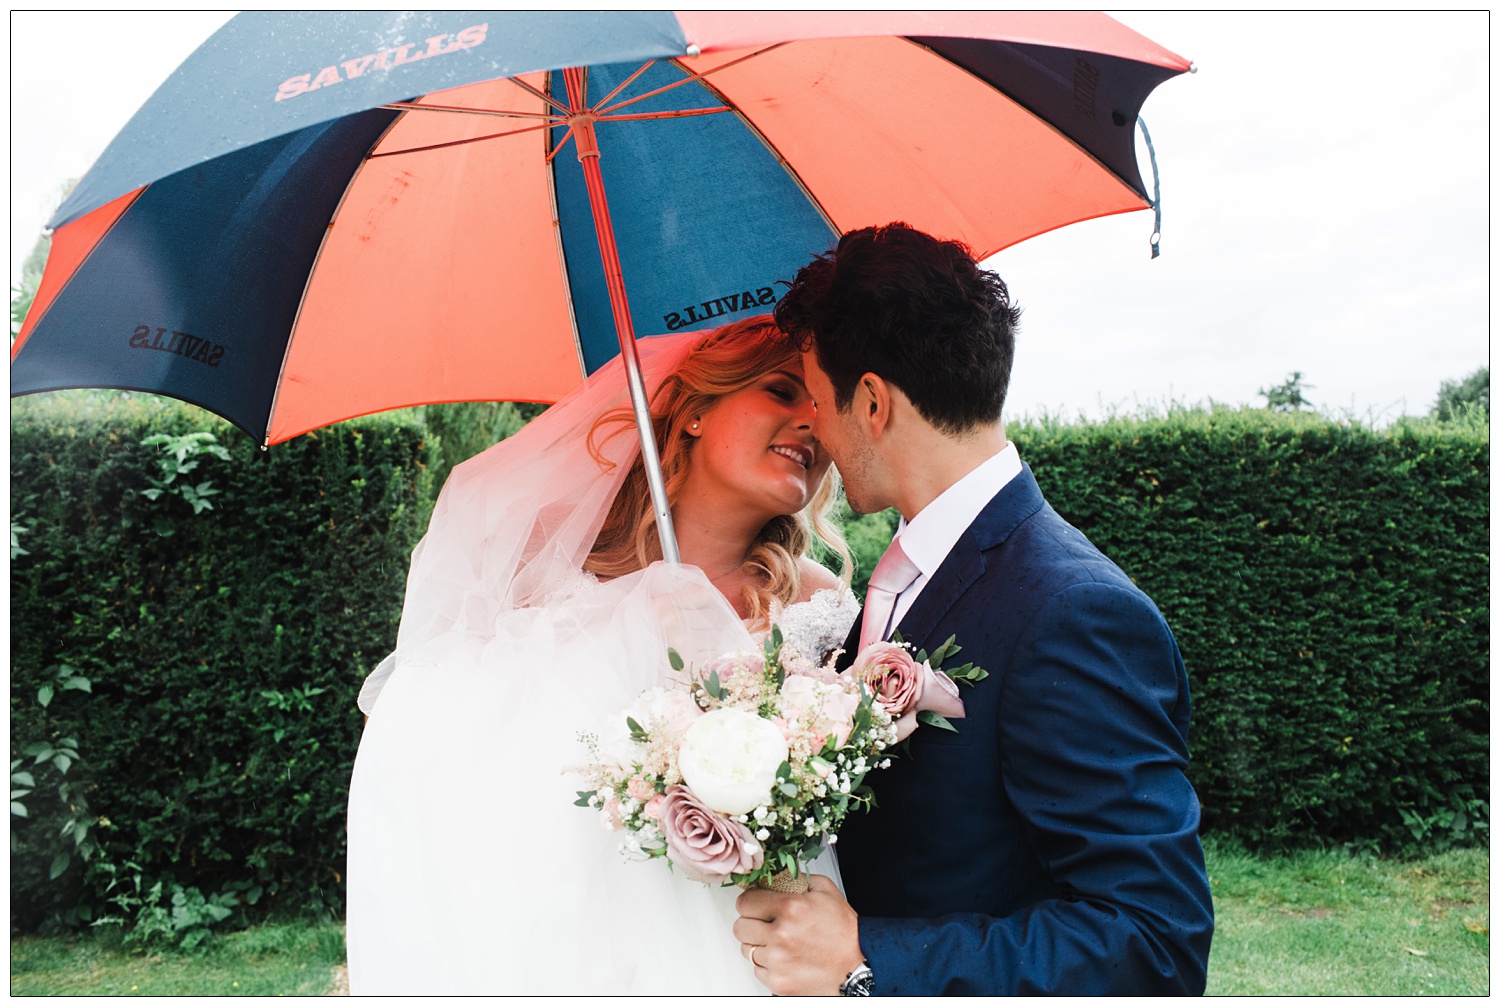 Bride and groom about to kiss under an umbrella.